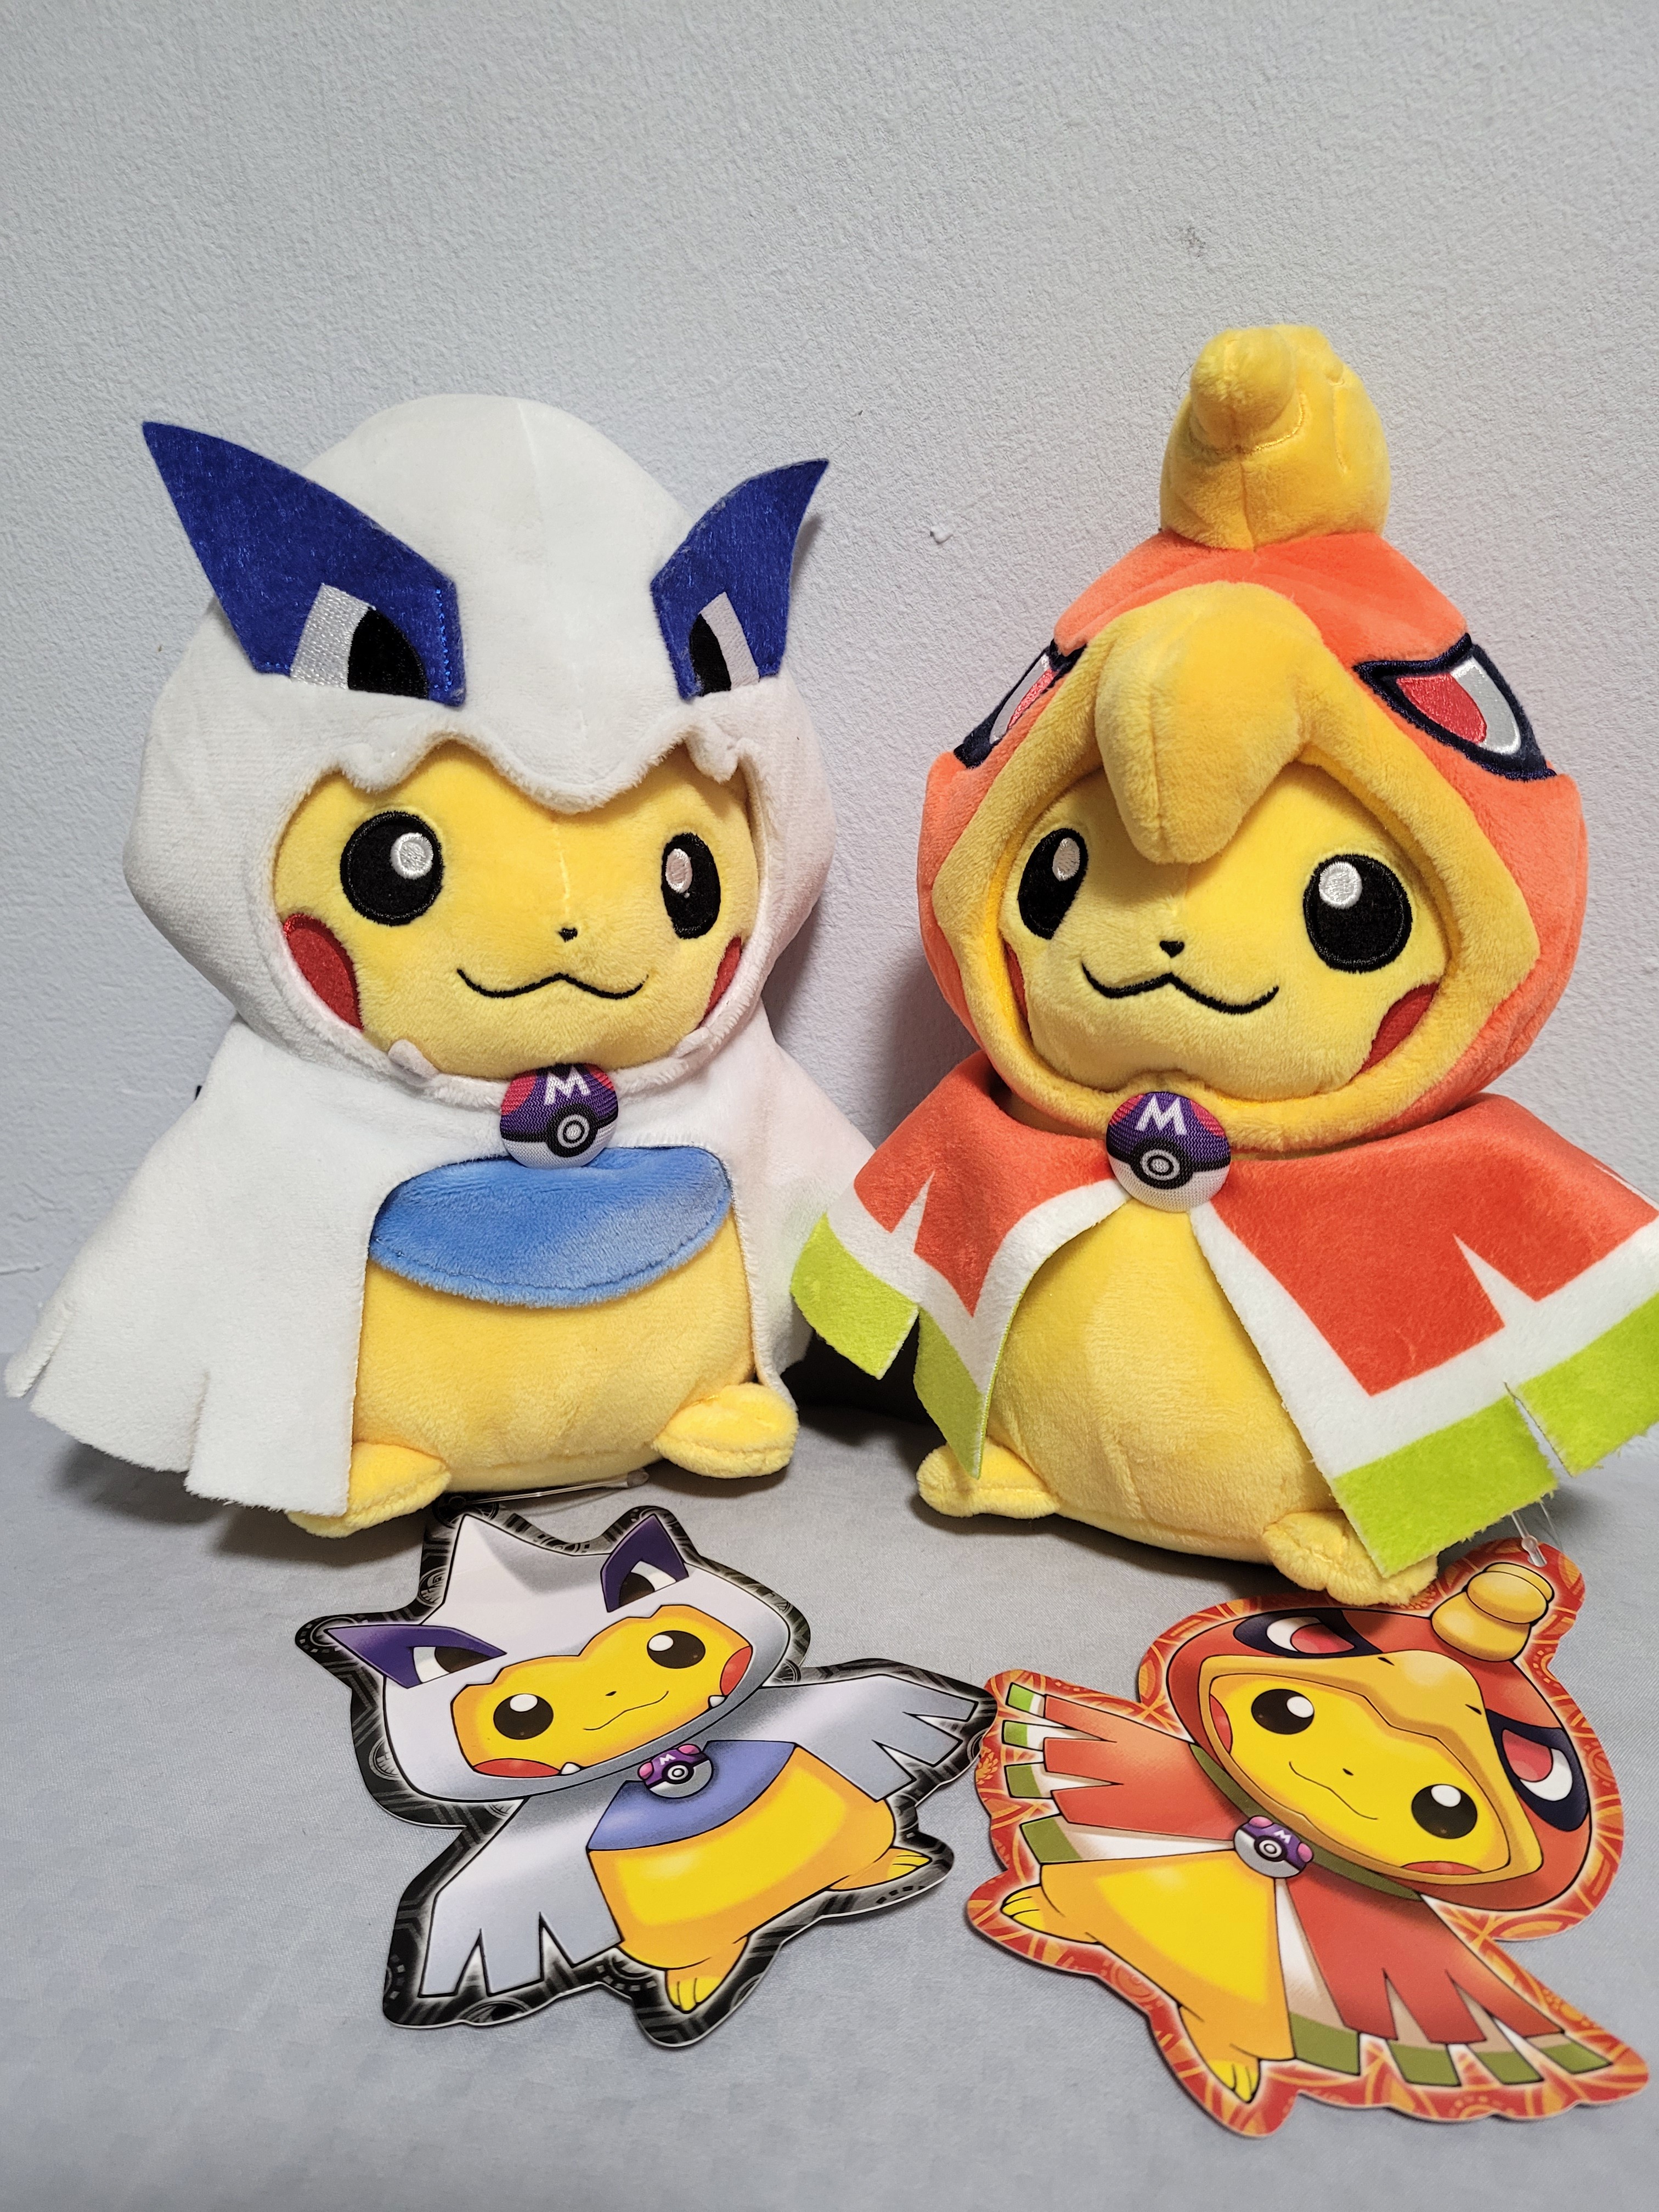 PokéJungle: Pokémon Game & Merch News on X: Pokémon Center Kyoto will be  moving and opening at their new location on March 16! Features statues of  Ho-oh and Lugia in the store.